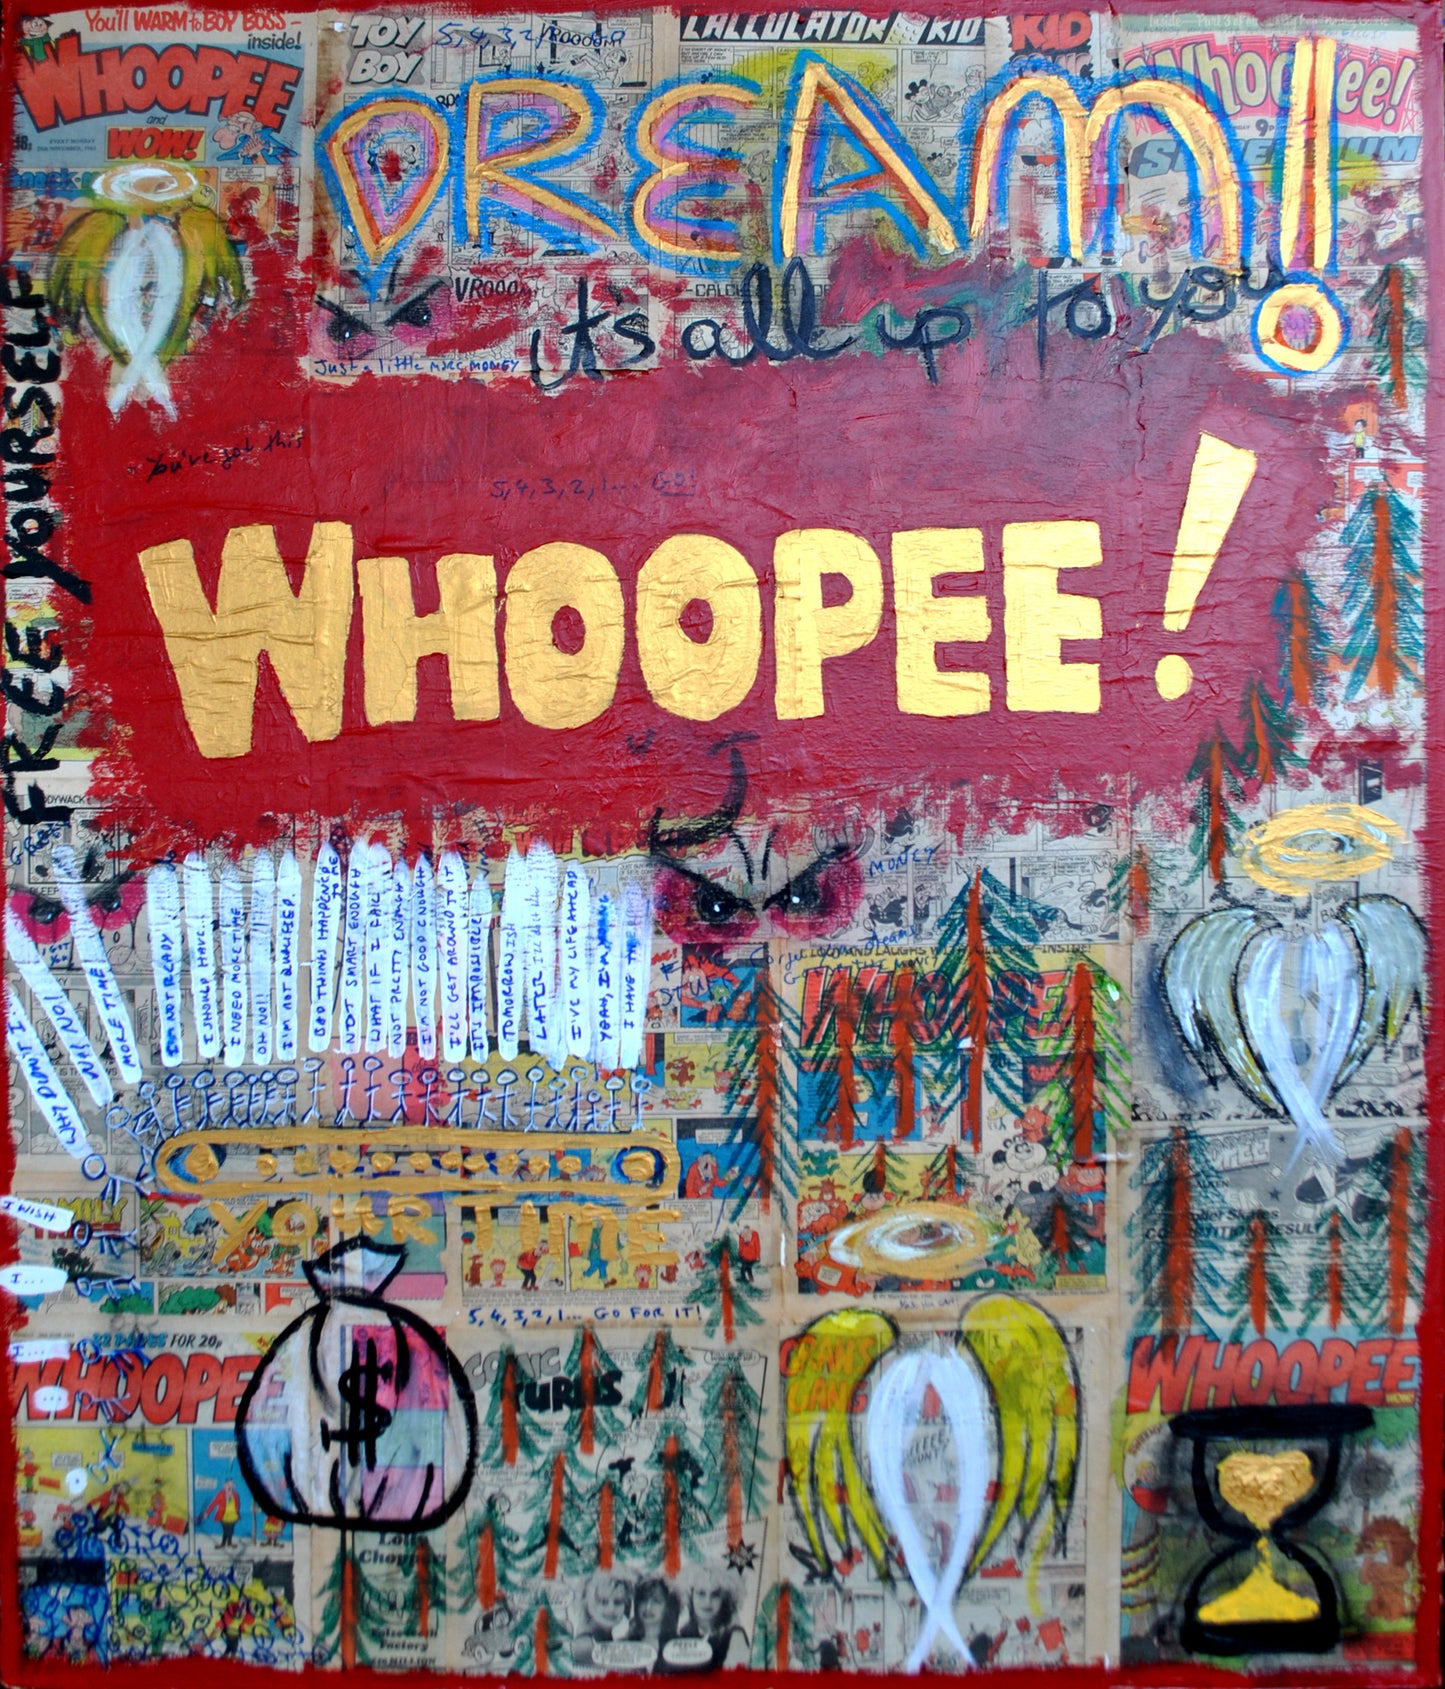 Whoopee! by James Marshall